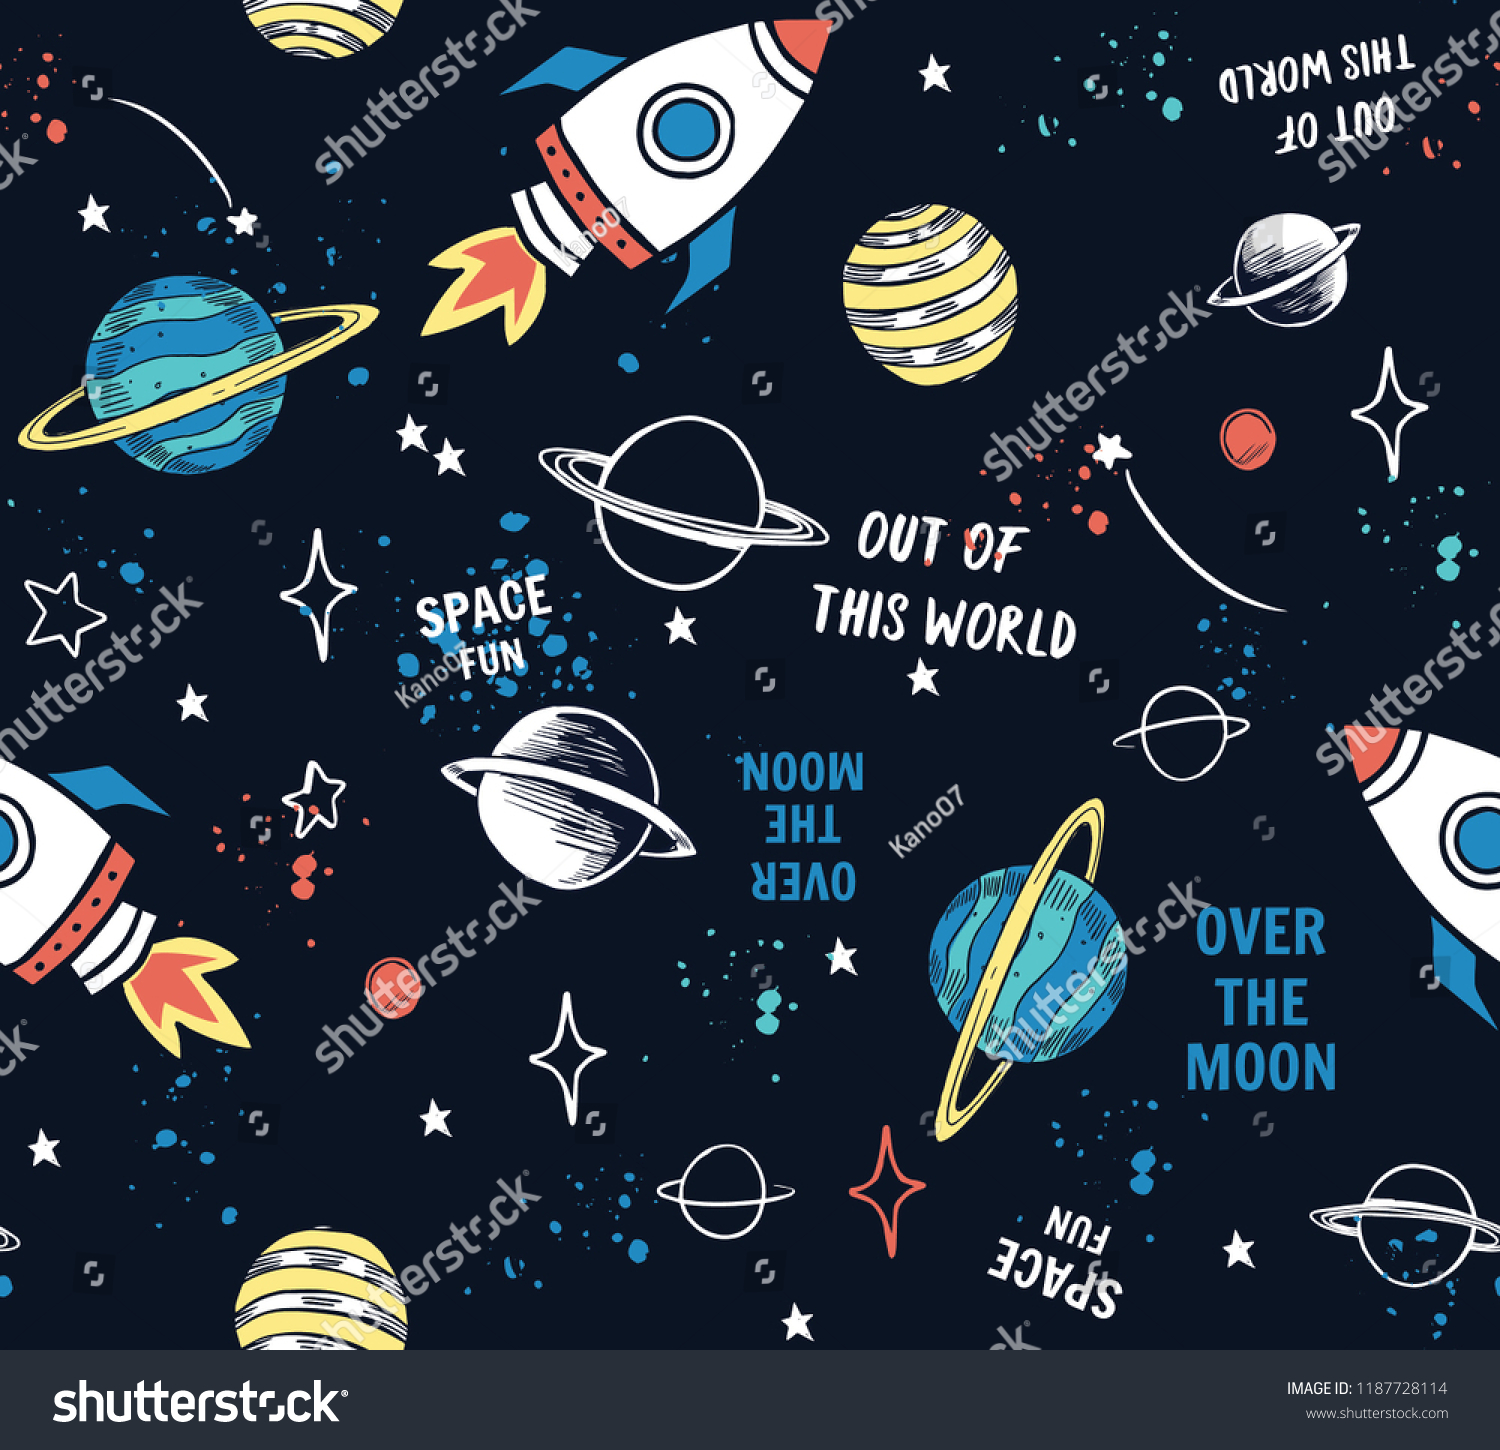 Hand drawn space elements seamless pattern. Space background. Space doodle illustration. Vector illustration. Seamless pattern with cartoon space rockets, planets, stars, slogans #1187728114